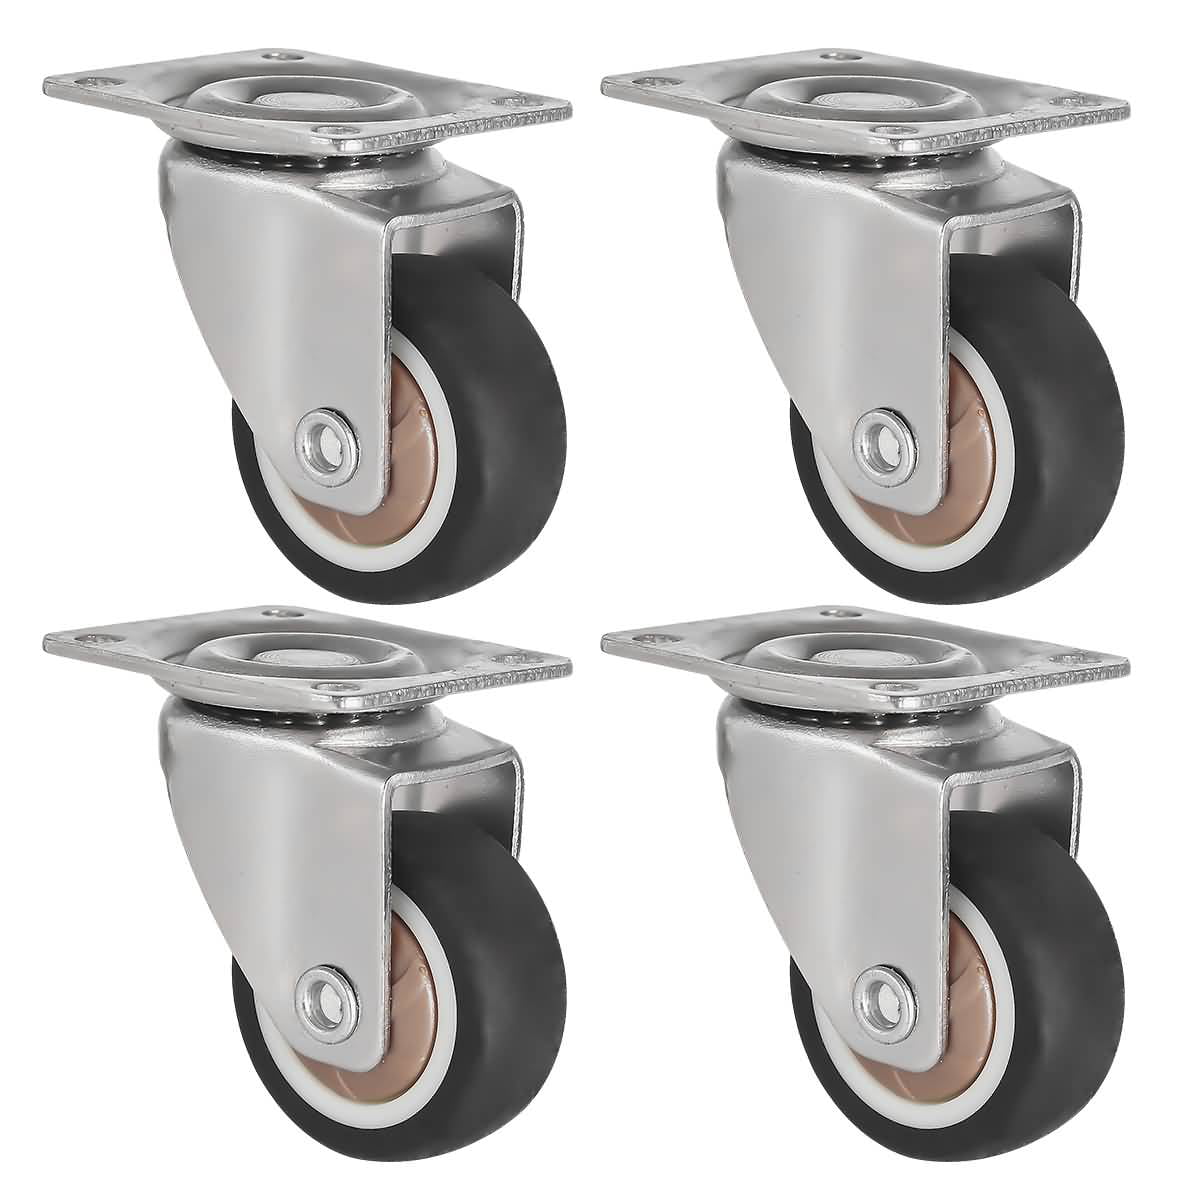 Casters For Furniture Small Swivel Plate Rubber Moving Plate Cart Floor Set Of 4 